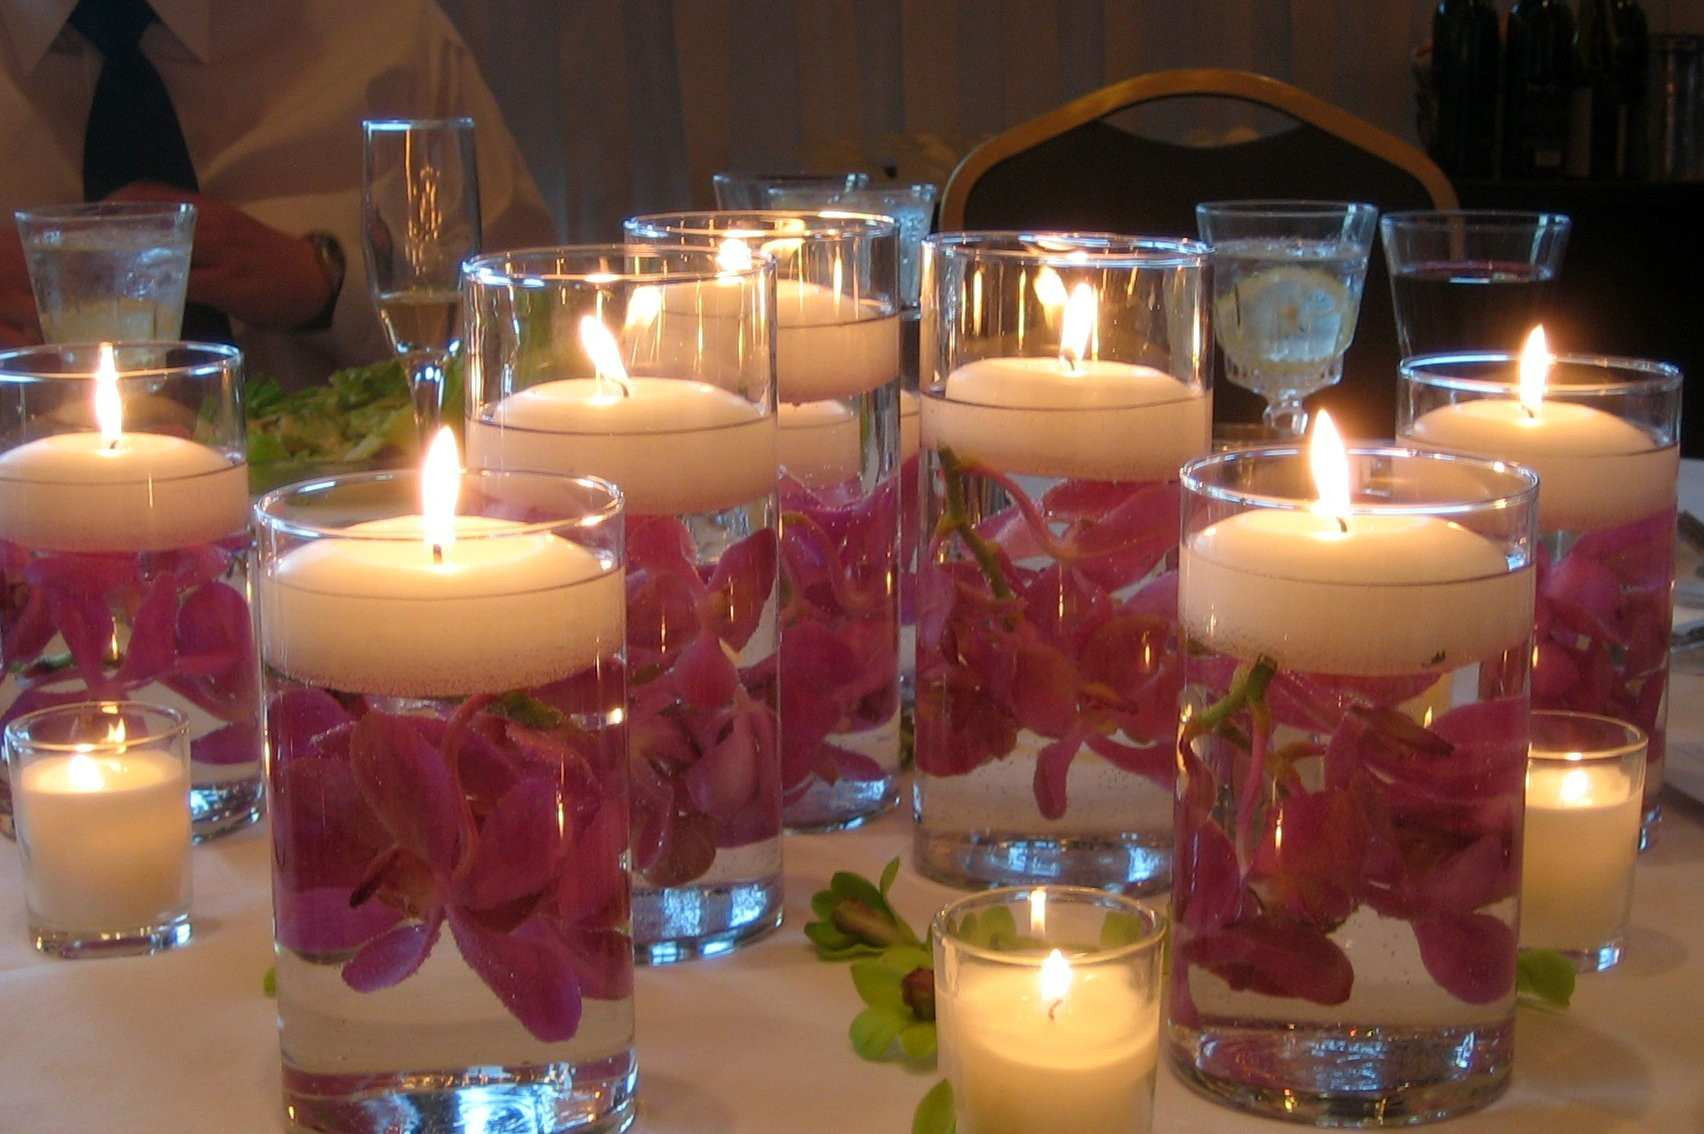 14 Famous Wedding Centerpieces Vases and Candles 2024 free download wedding centerpieces vases and candles of decorating ideas for wedding on a budget new dsc h vases square for decorating ideas for wedding on a budget elegant cheap wedding reception centerp